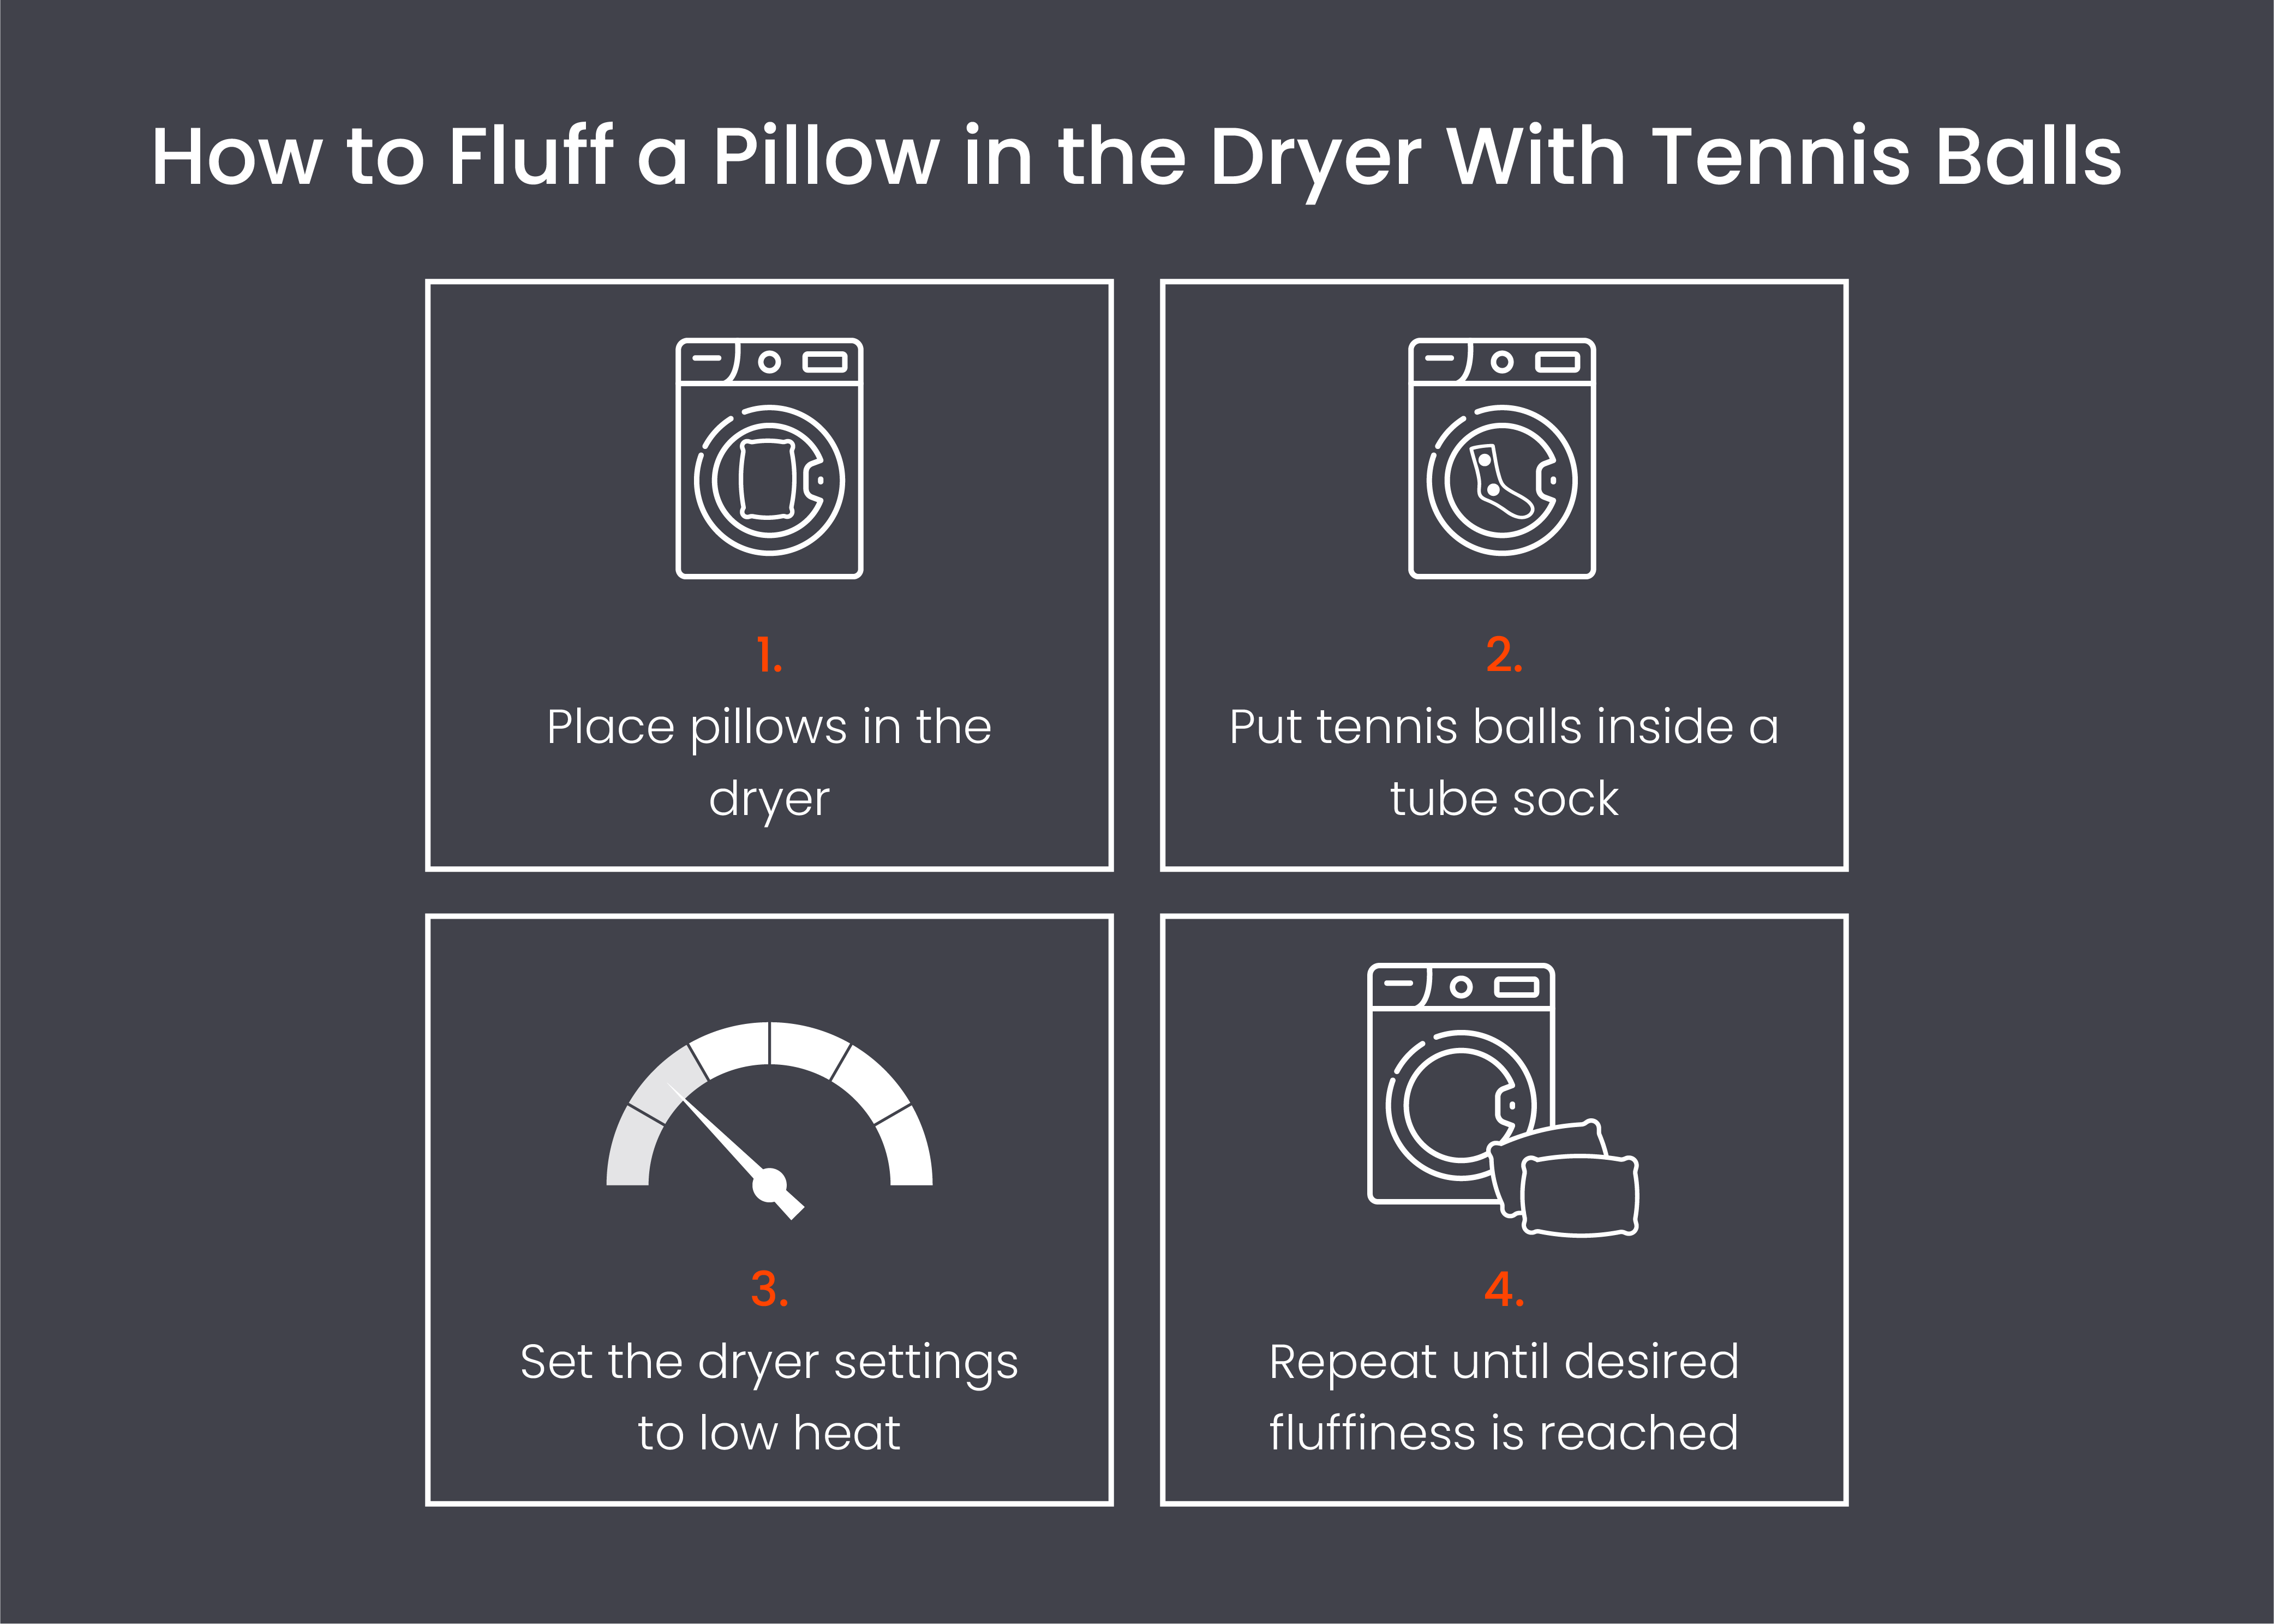 How to fluff a pillow in the dryer with tennis balls